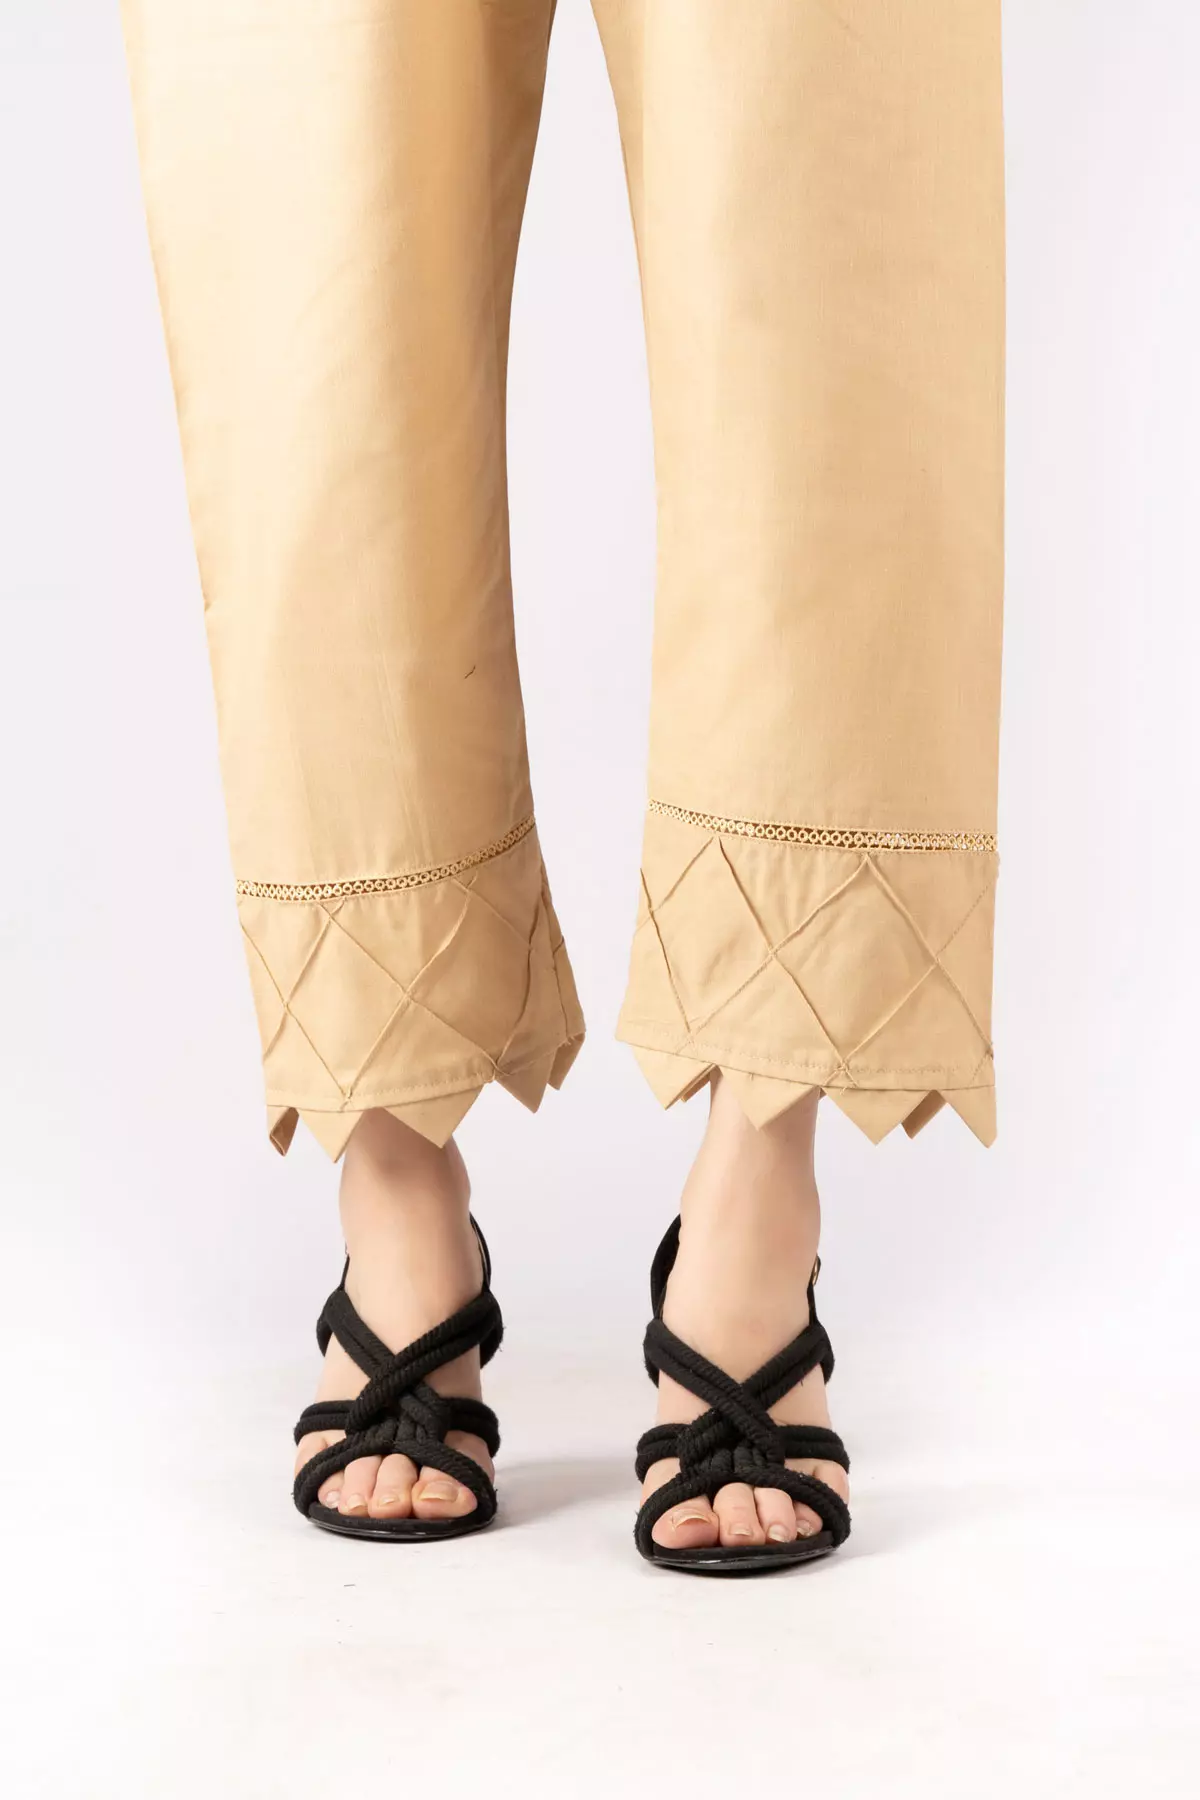 Embroidered trousers by Pakistani high street brand Generation. Leather  sandals are traditional Pakistani Peshawari… | Fashion, Indian designer  wear, Indian fashion